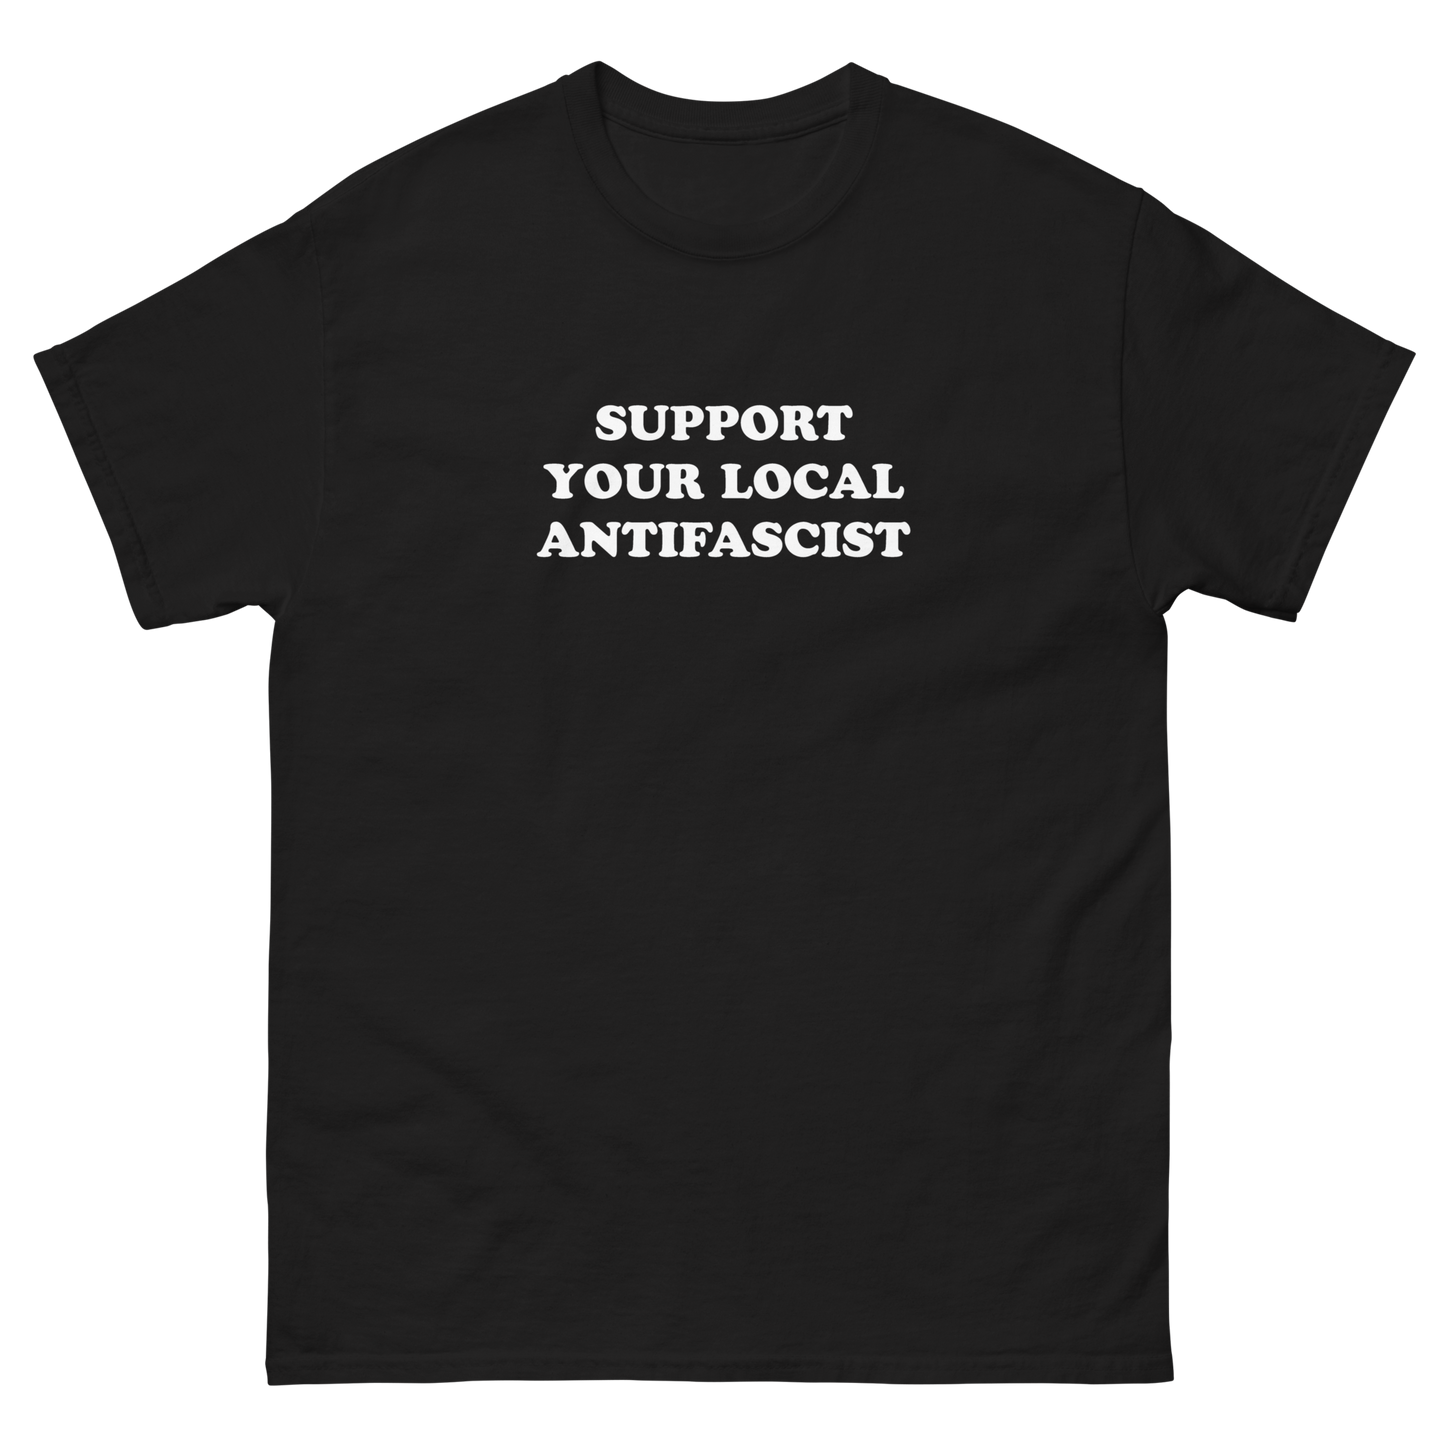 Stealworks "Support Your Local Antifascist" T-shirt